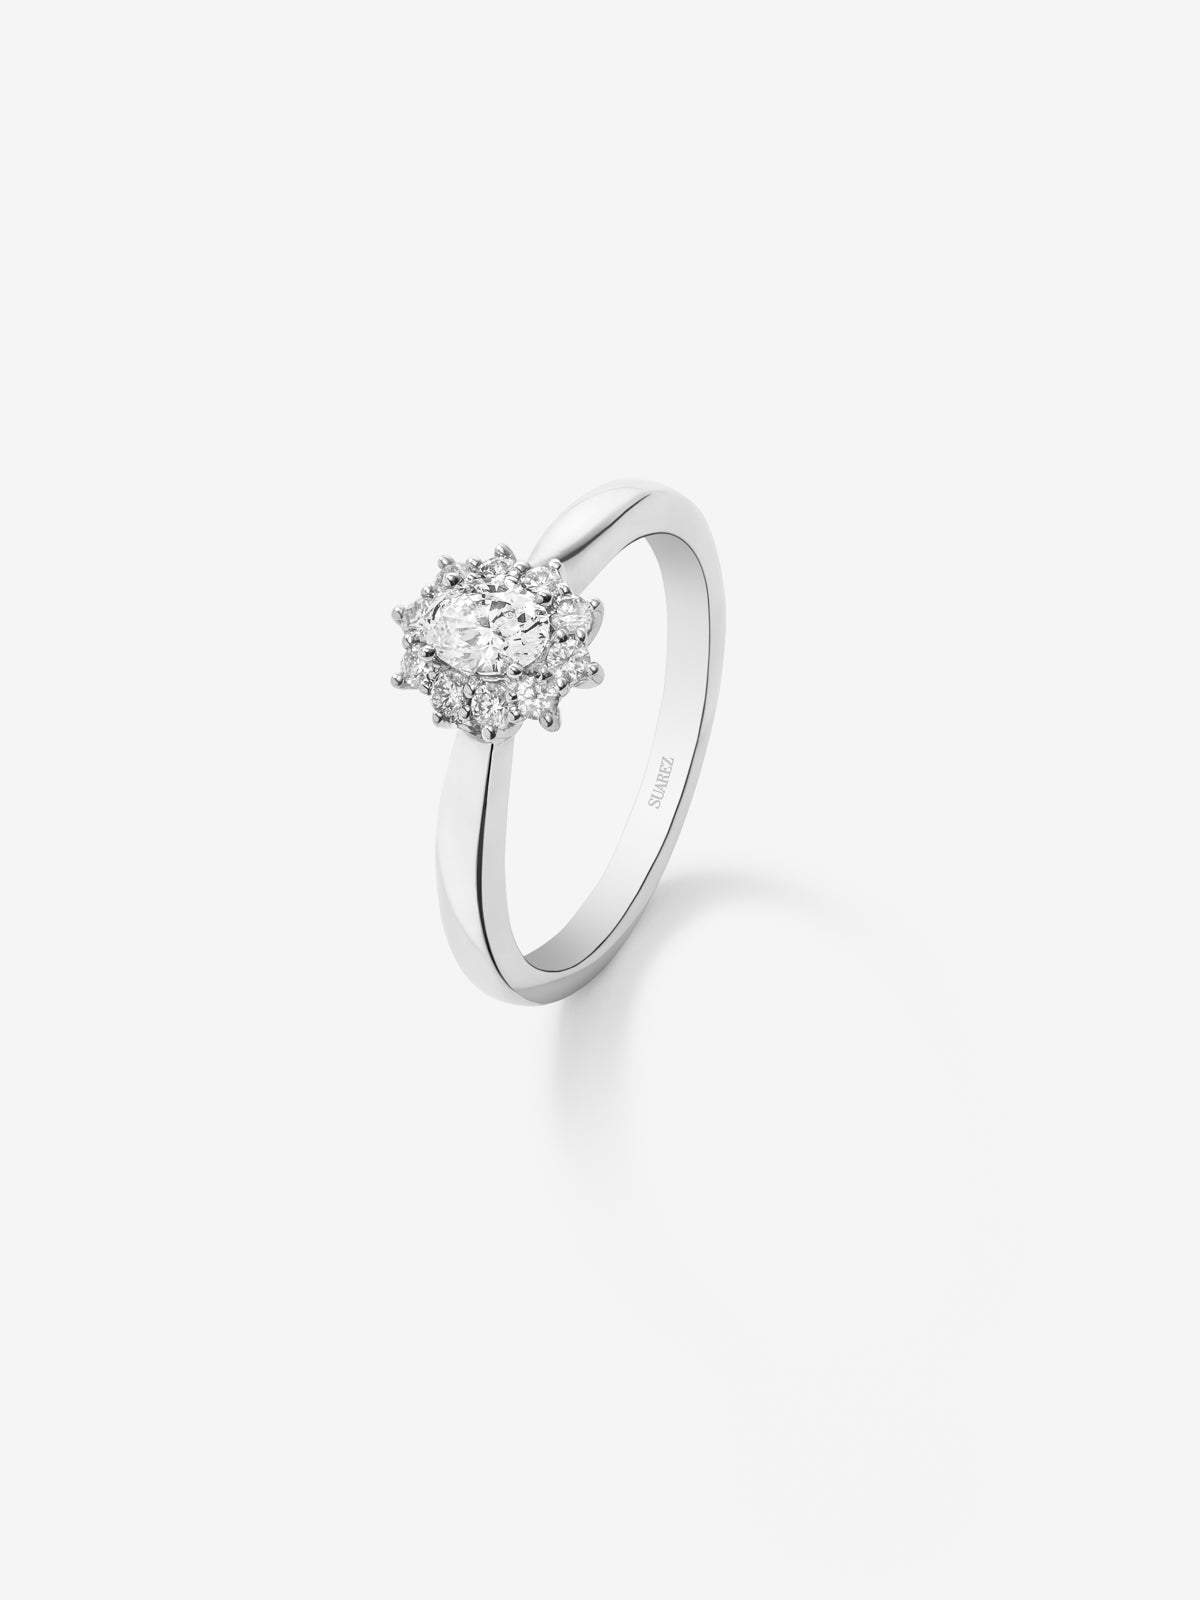 18K white gold solitaire engagement ring with diamond